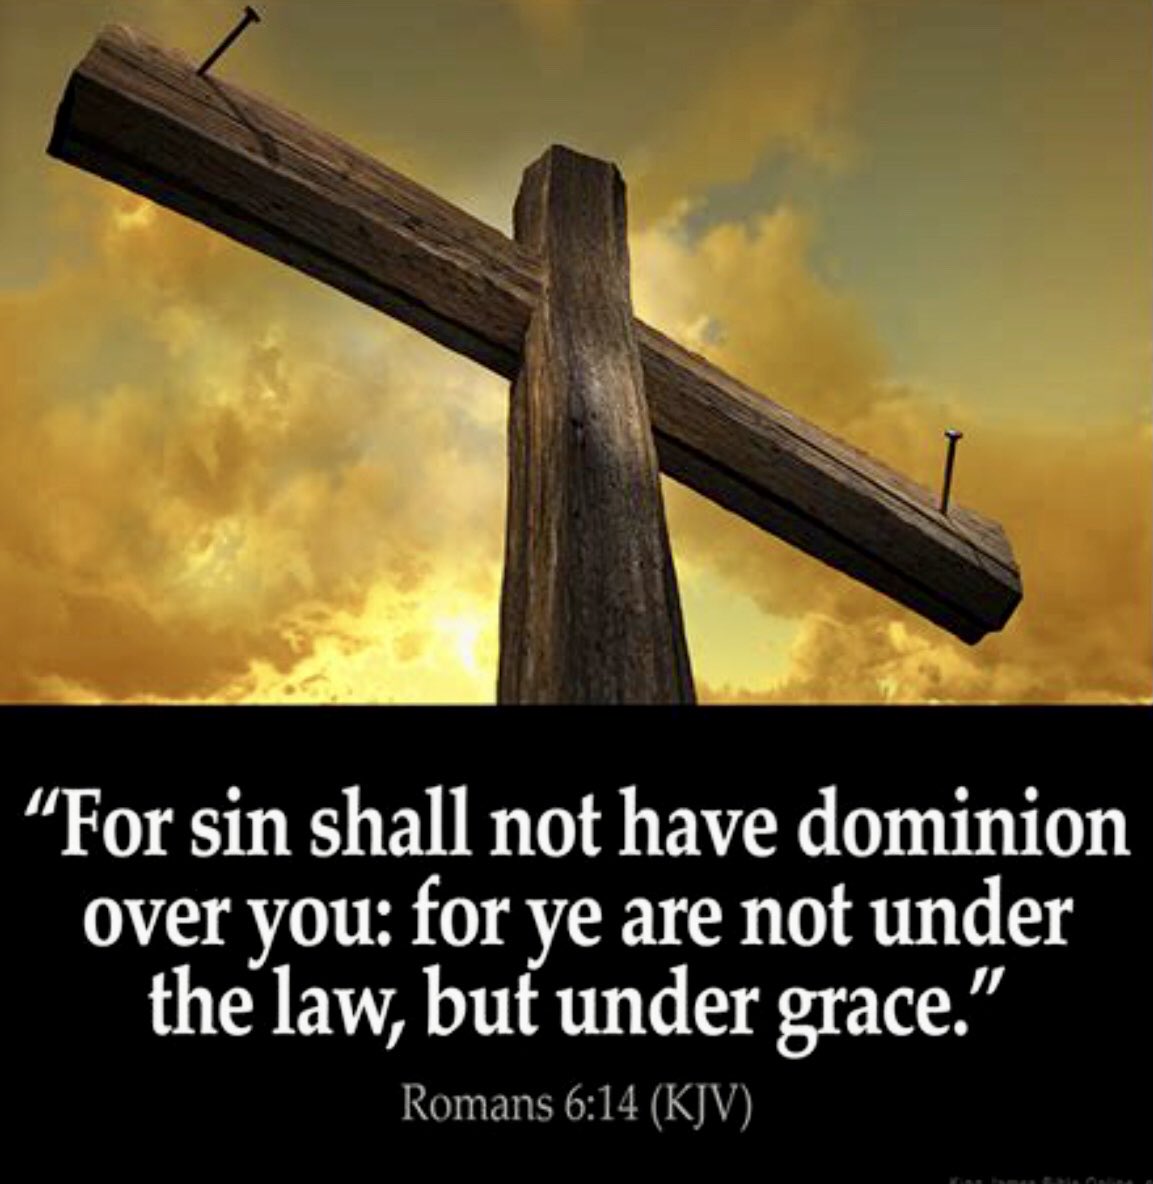 Stop arguing that we are still under the Law. Christ came to fulfill the law. Matt 5:17 We are now under this period of God’s grace, for those who believe completely in Jesus’ finished work on the cross. That’s it. Jesus said “it is finished.” John 19:28:30 ✝️❣️🙌🏻